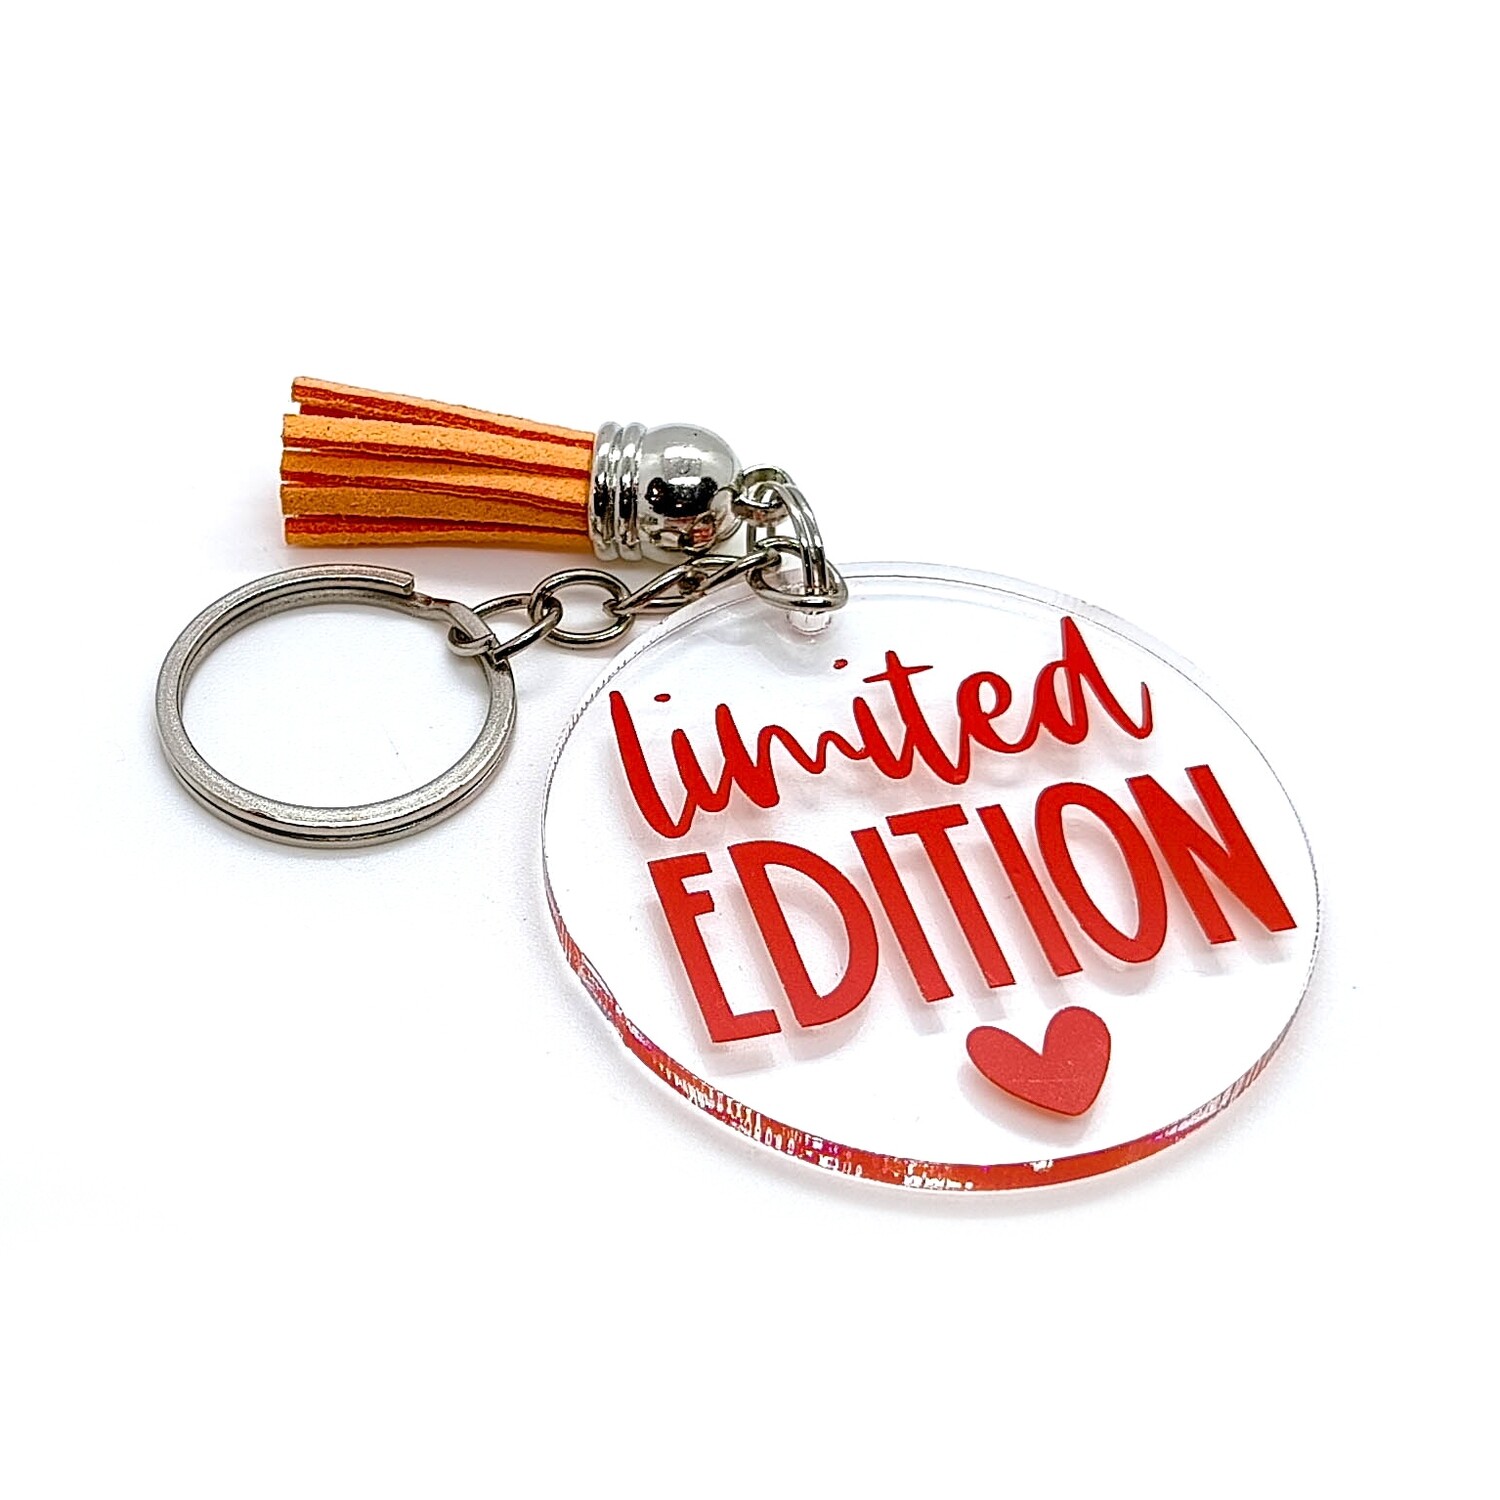 'Limited Edition' key chain